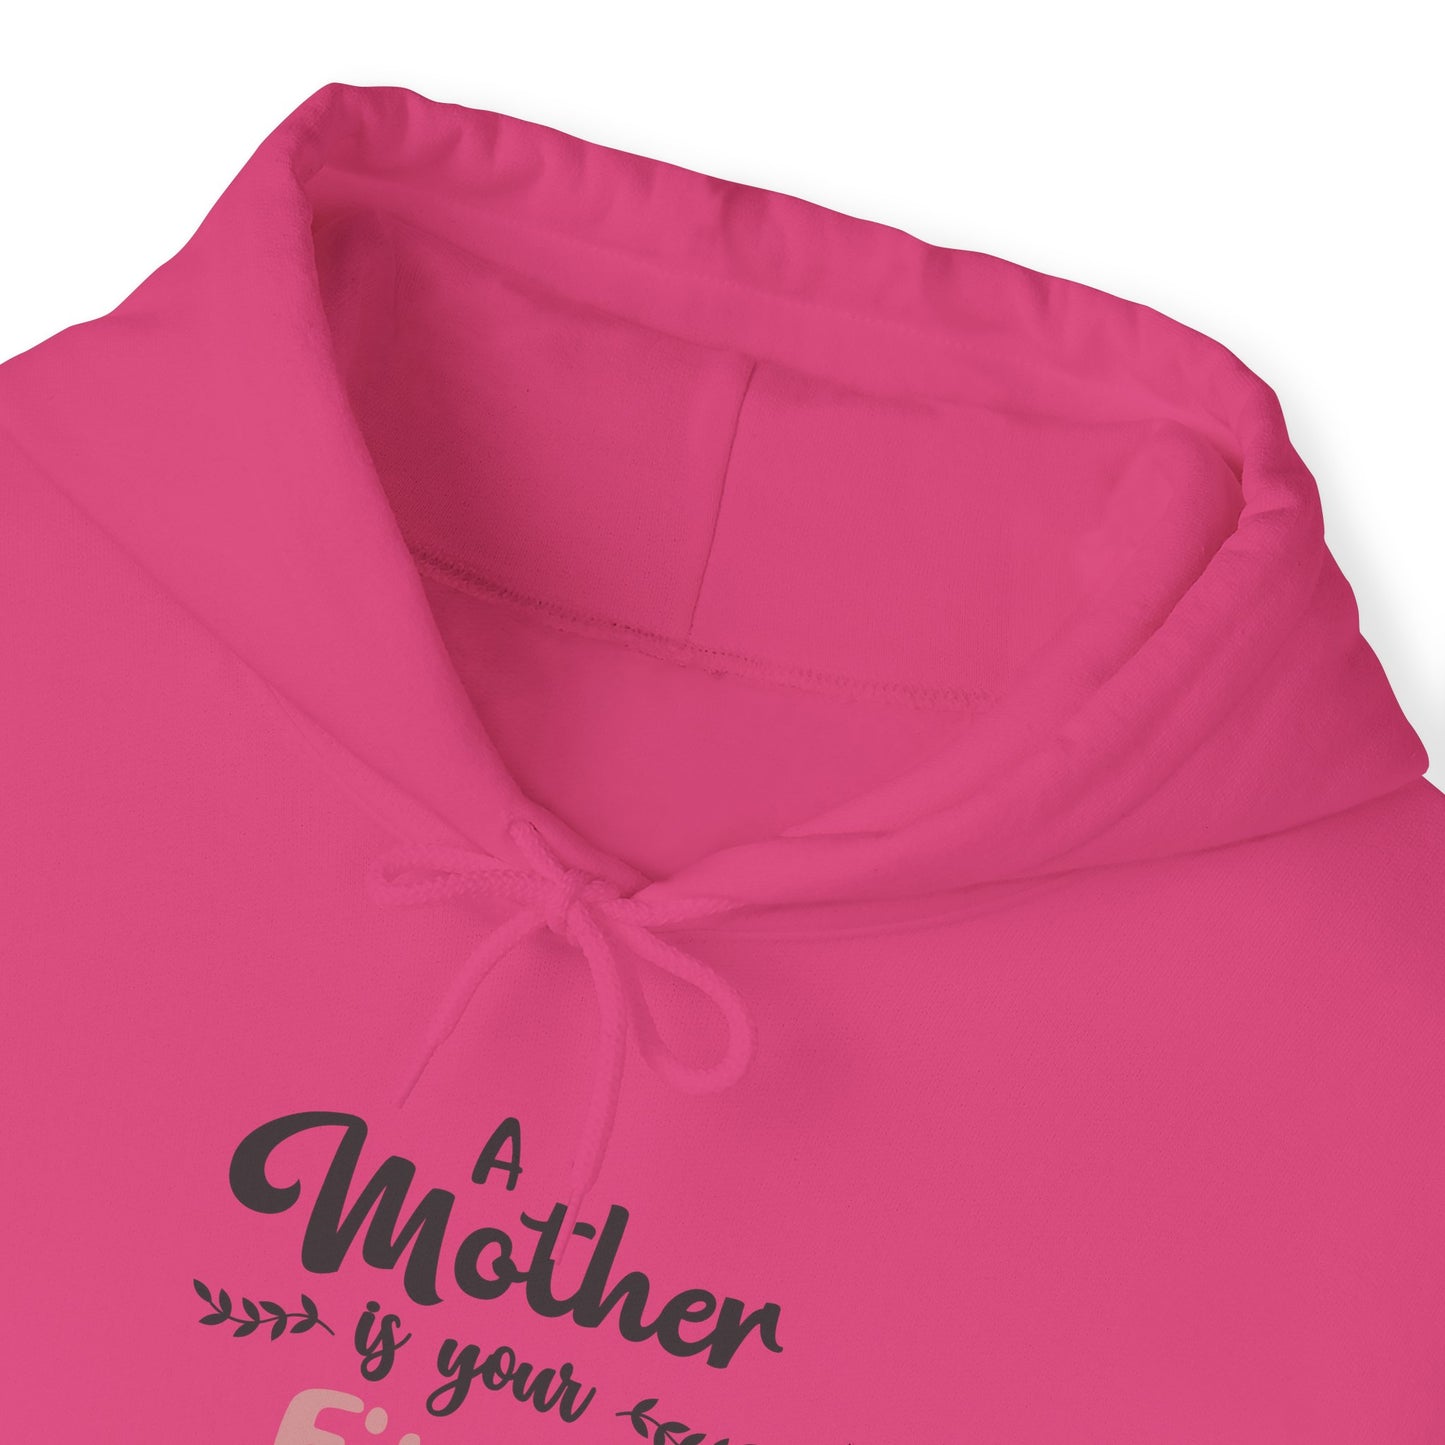 A Mother is your first, best and forever friend - Unisex Heavy Blend™ Hooded Sweatshirt